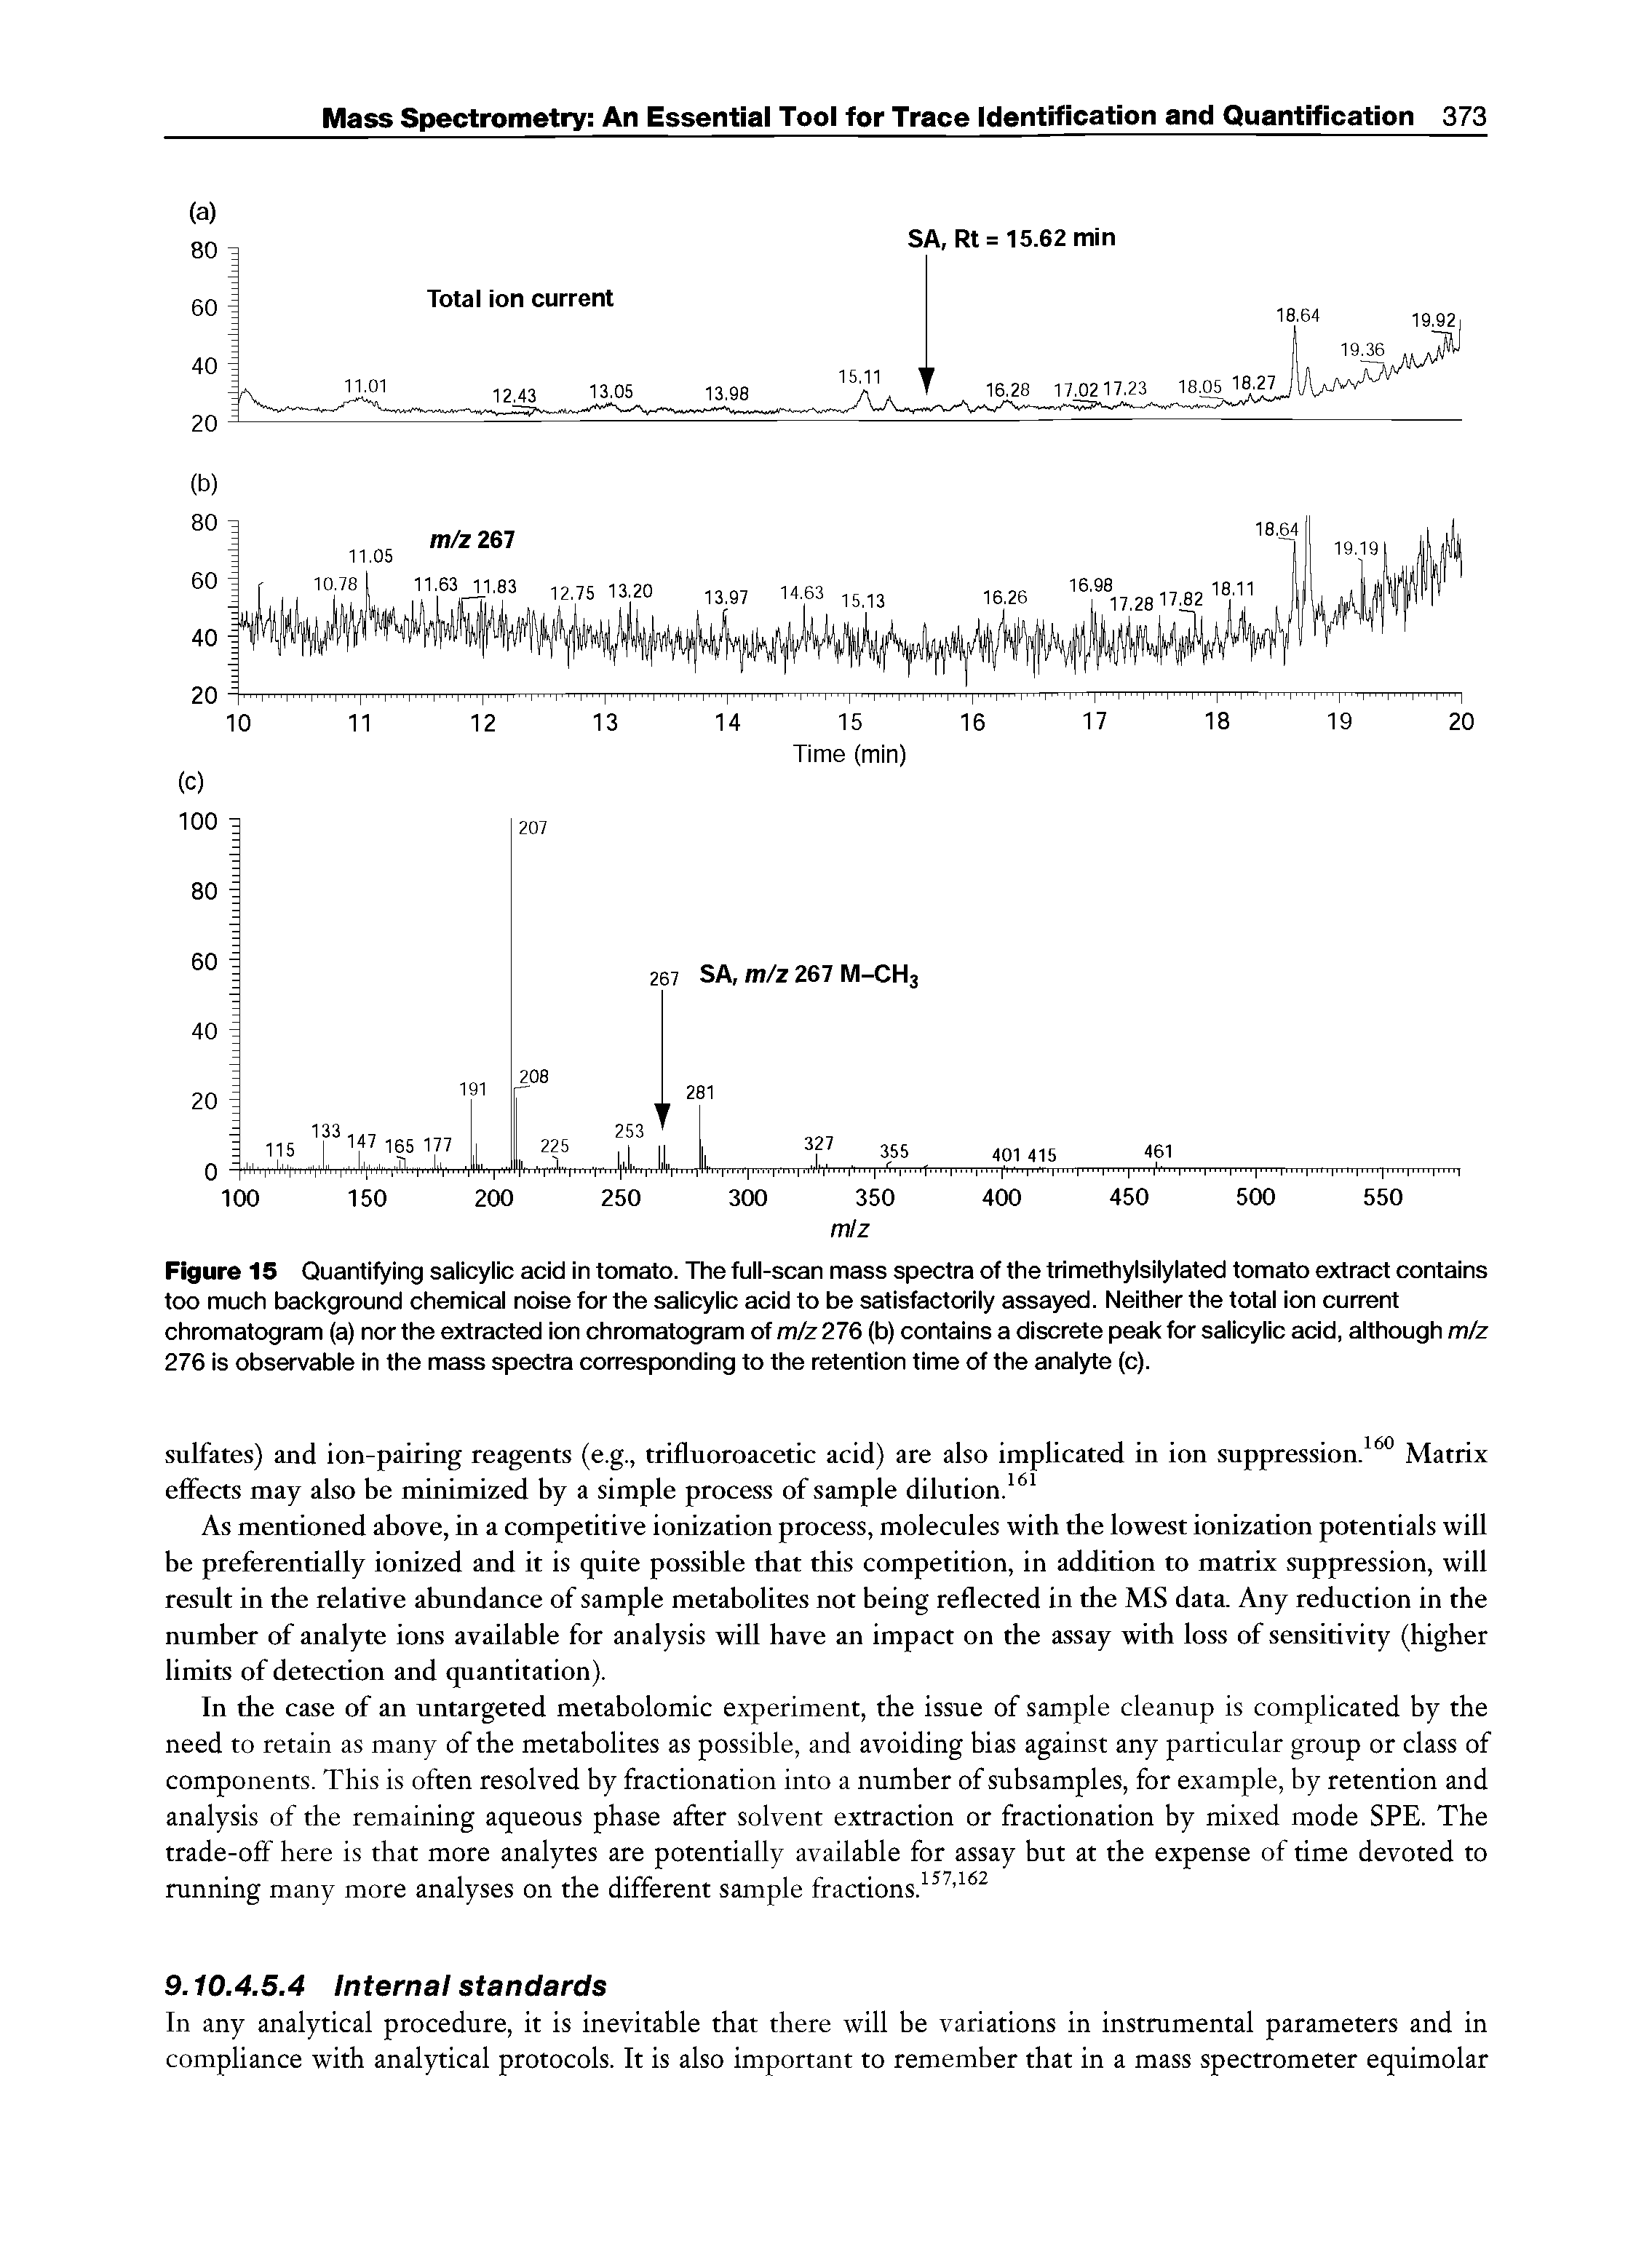 Figure 15 Quantifying salicylic acid in tomato. The full-scan mass spectra of the trimethylsilylated tomato extract contains too much background chemical noise for the salicylic acid to be satisfactorily assayed. Neither the total ion current chromatogram (a) nor the extracted ion chromatogram of m/z 276 (b) contains a discrete peak for salicylic acid, although m/z 276 is observable in the mass spectra corresponding to the retention time of the analyte (c).